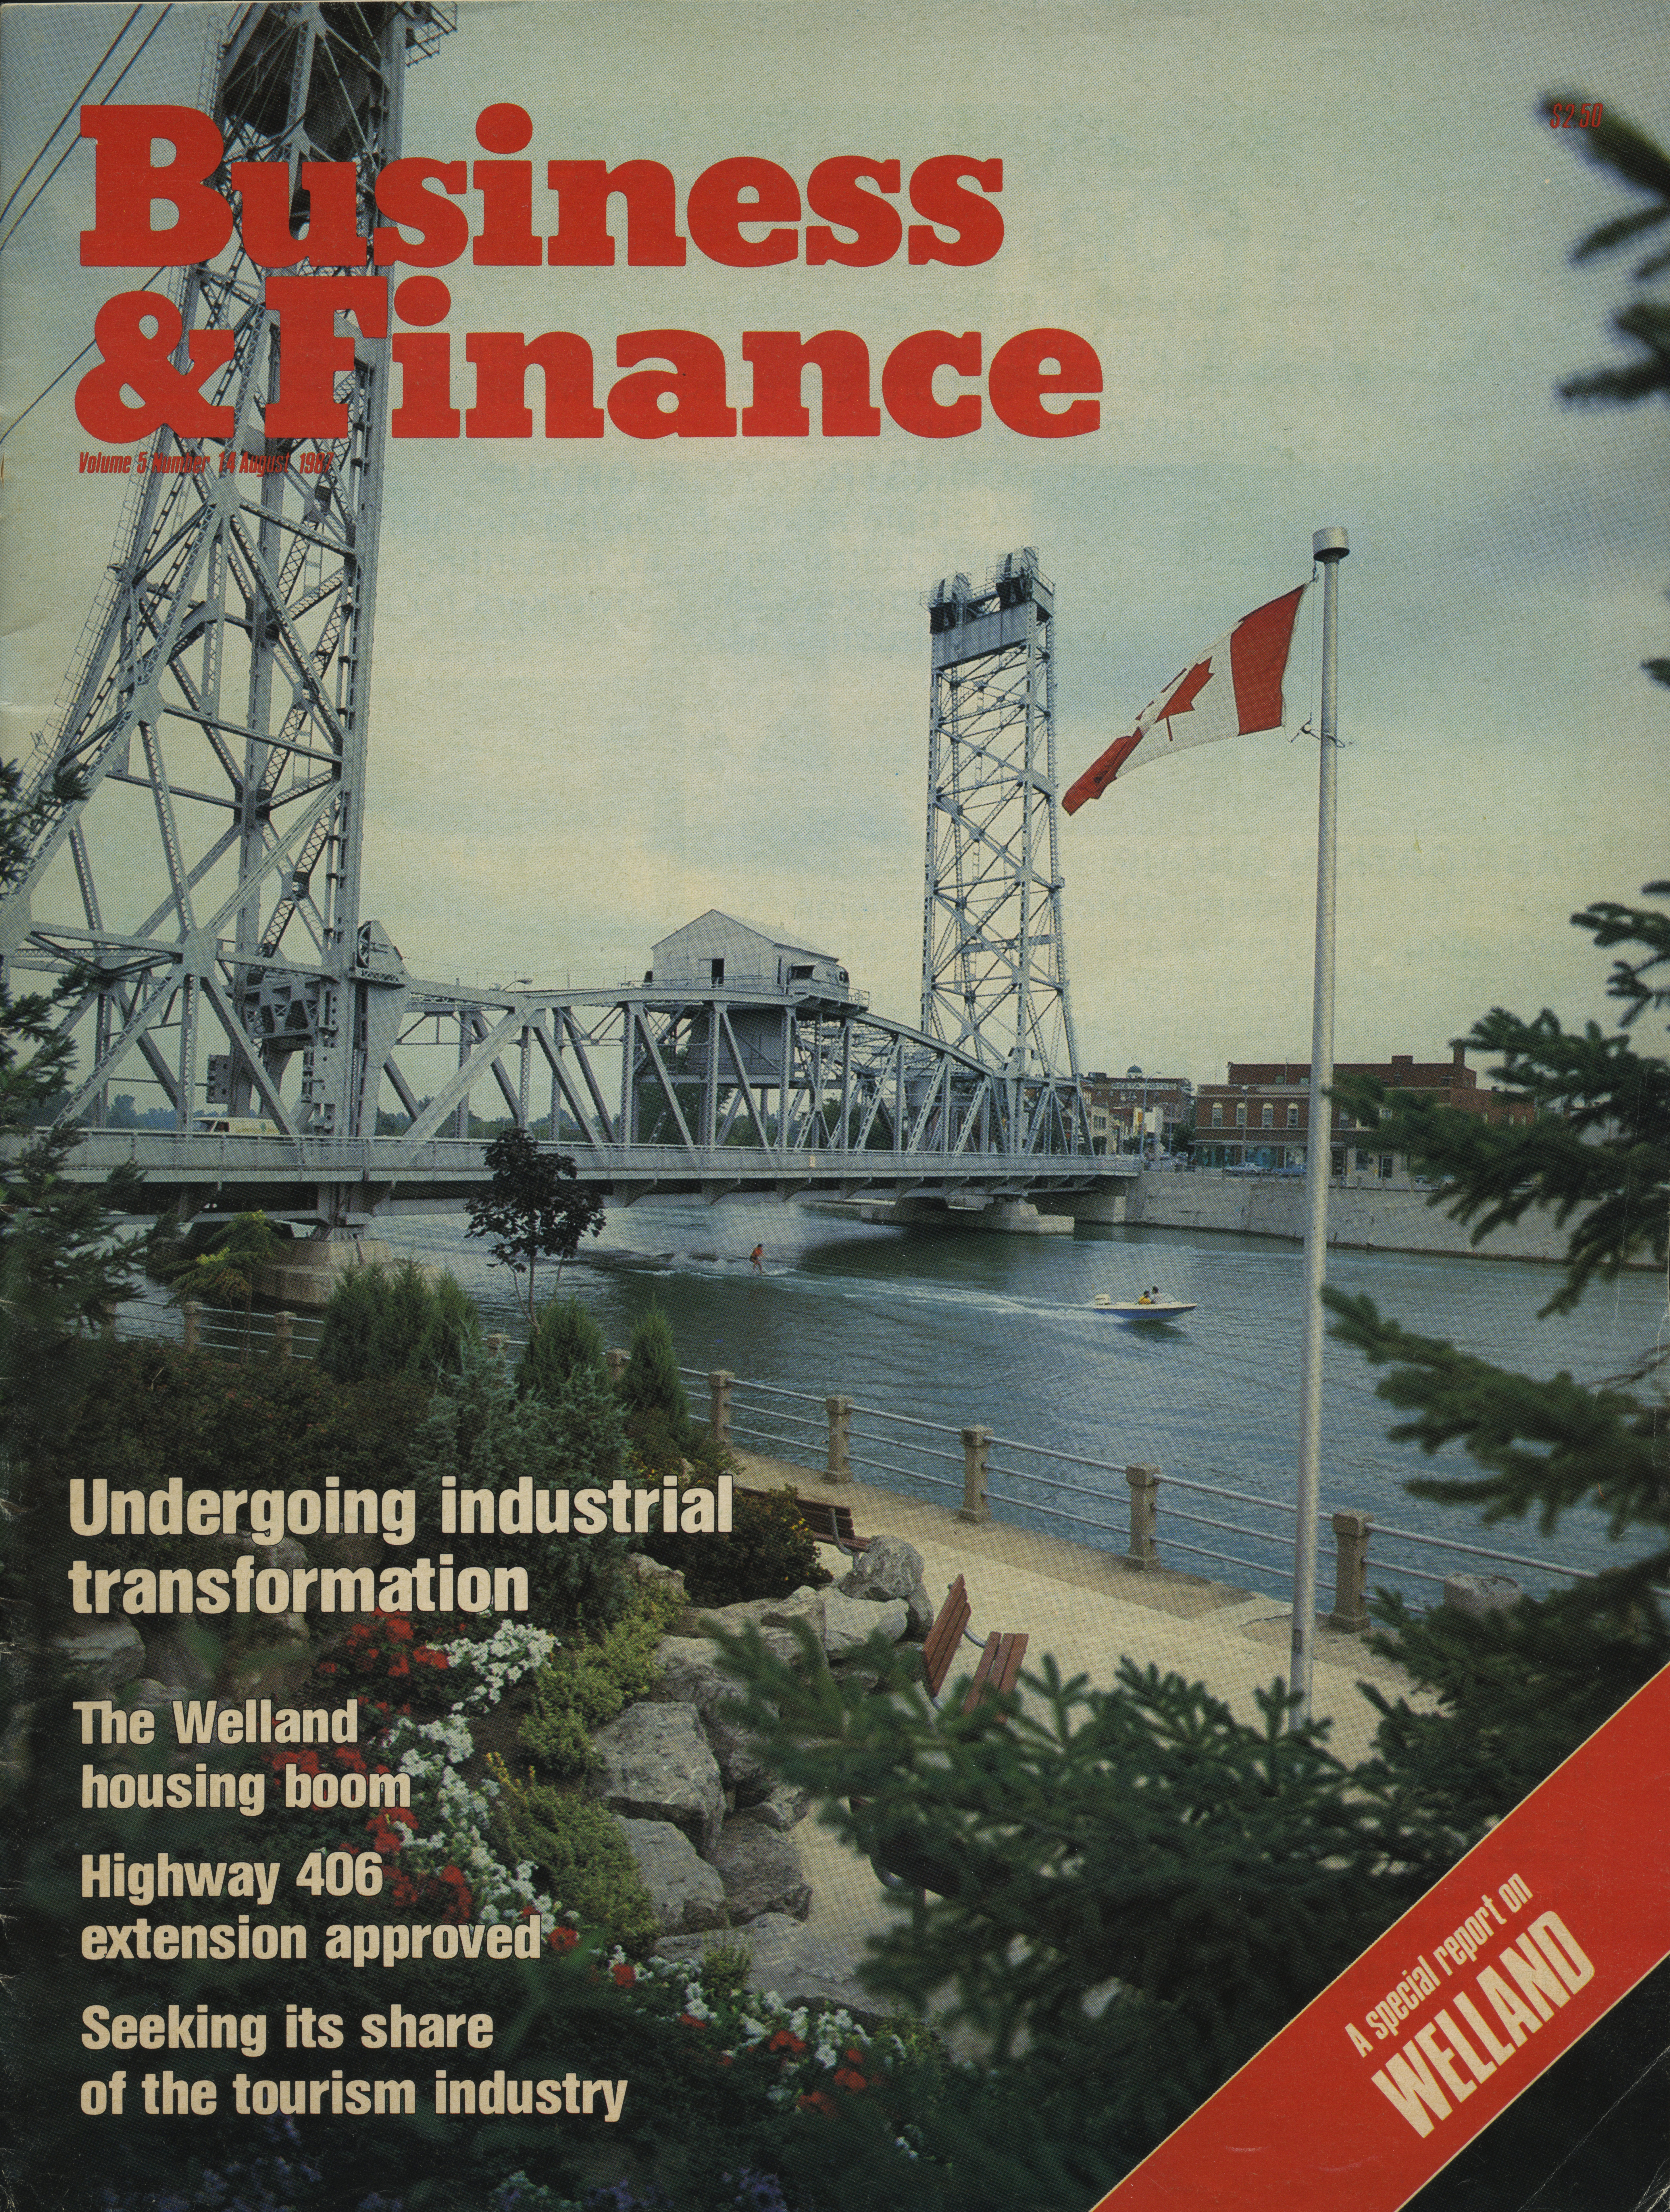 The cover of Business & Finance magazine. It shows a bridge over the canal, and a Canadian flag flying.